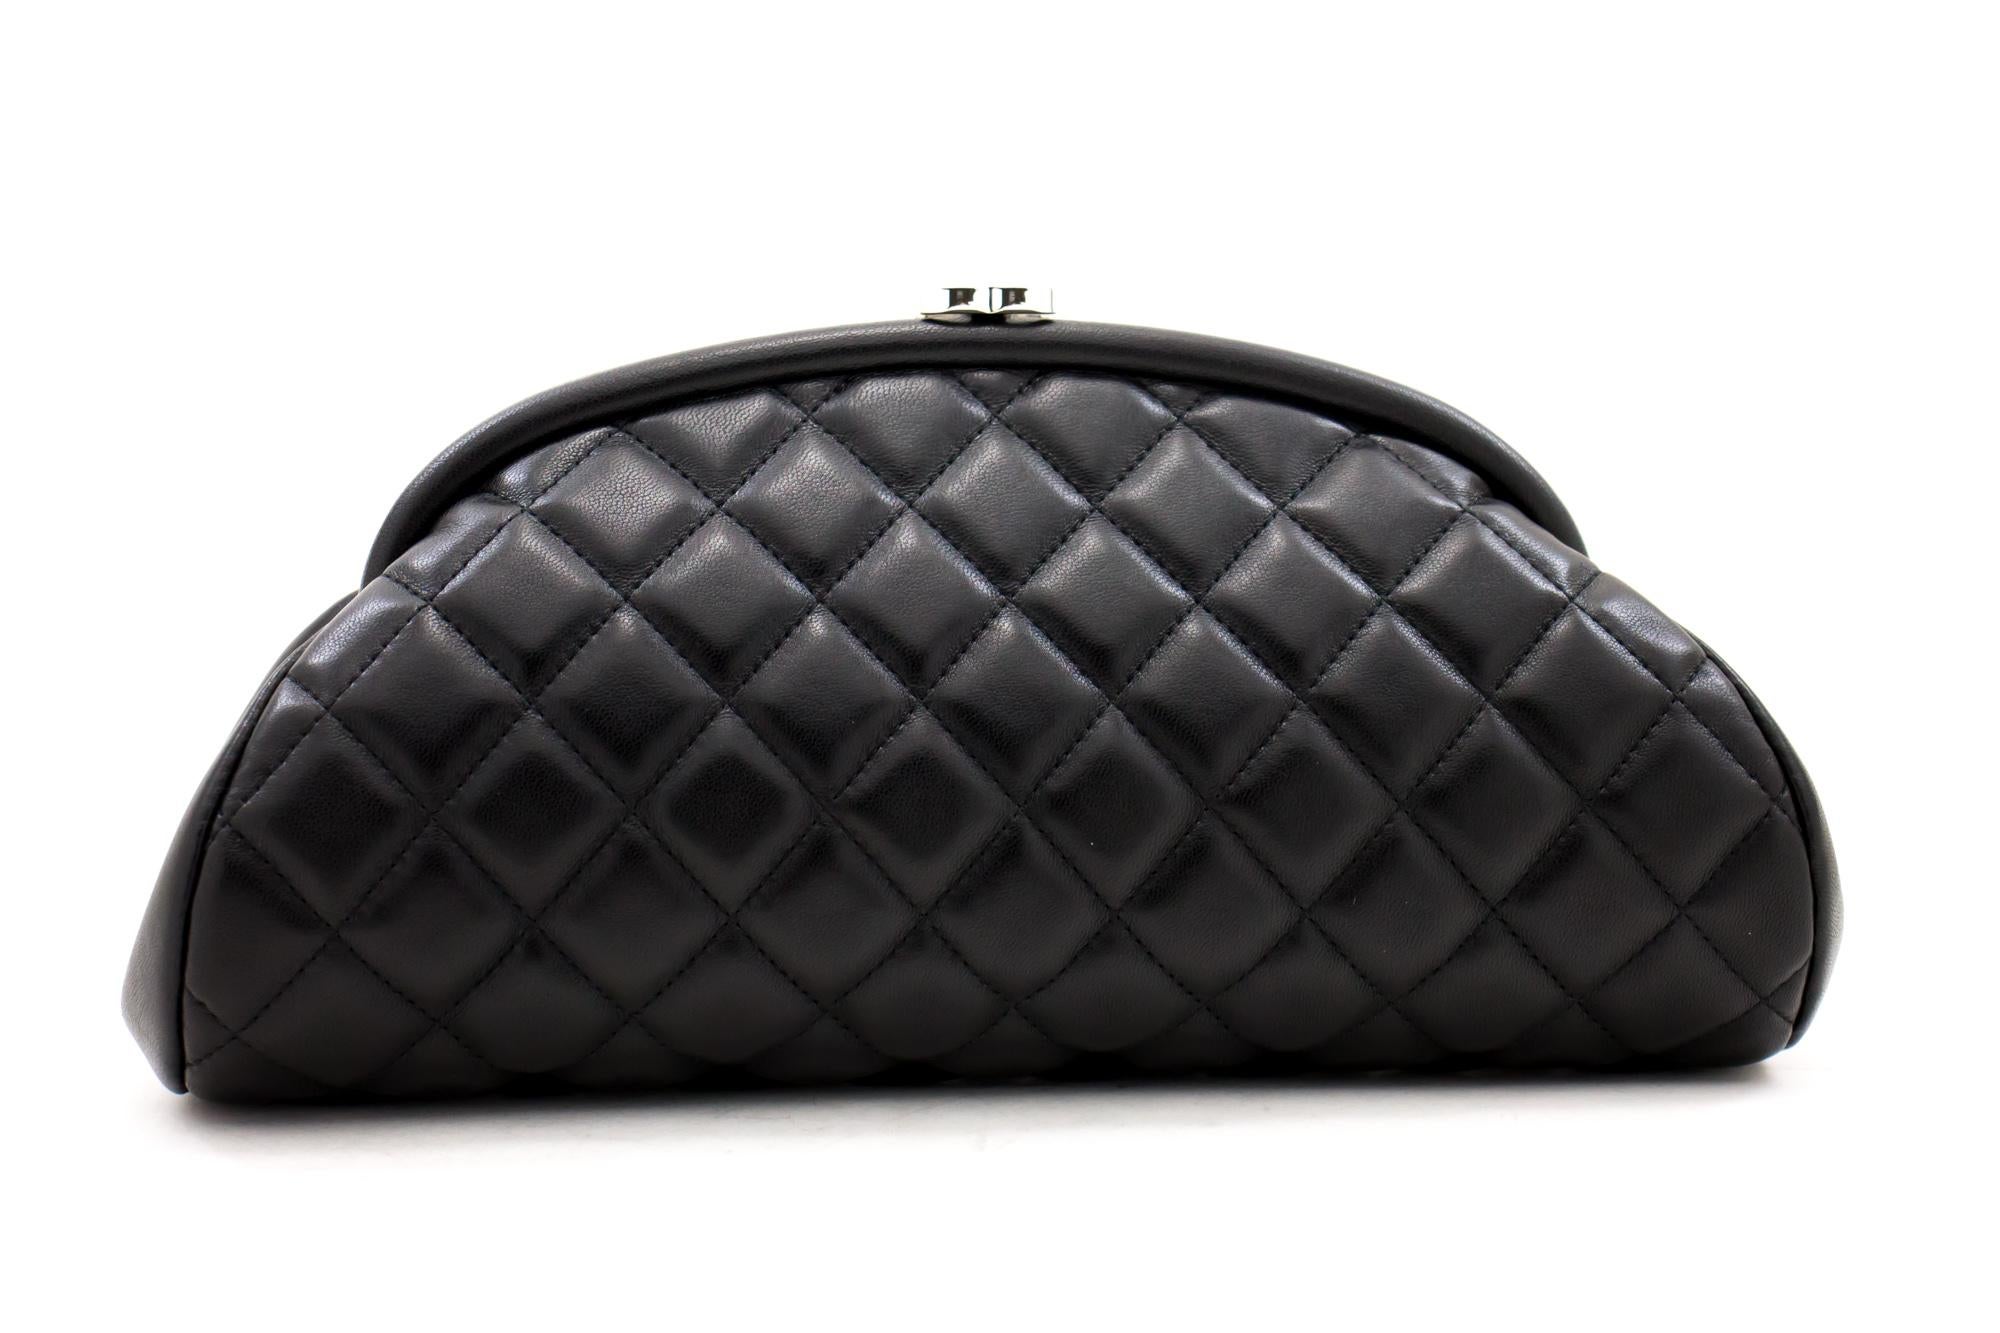 An authentic CHANEL made of black Lambskin Timeless Clutch Bag Black Quilted Silver Hardware. The color is Black. The outside material is Leather. The pattern is Solid. This item is Contemporary. The year of manufacture would be 2009.
Conditions &